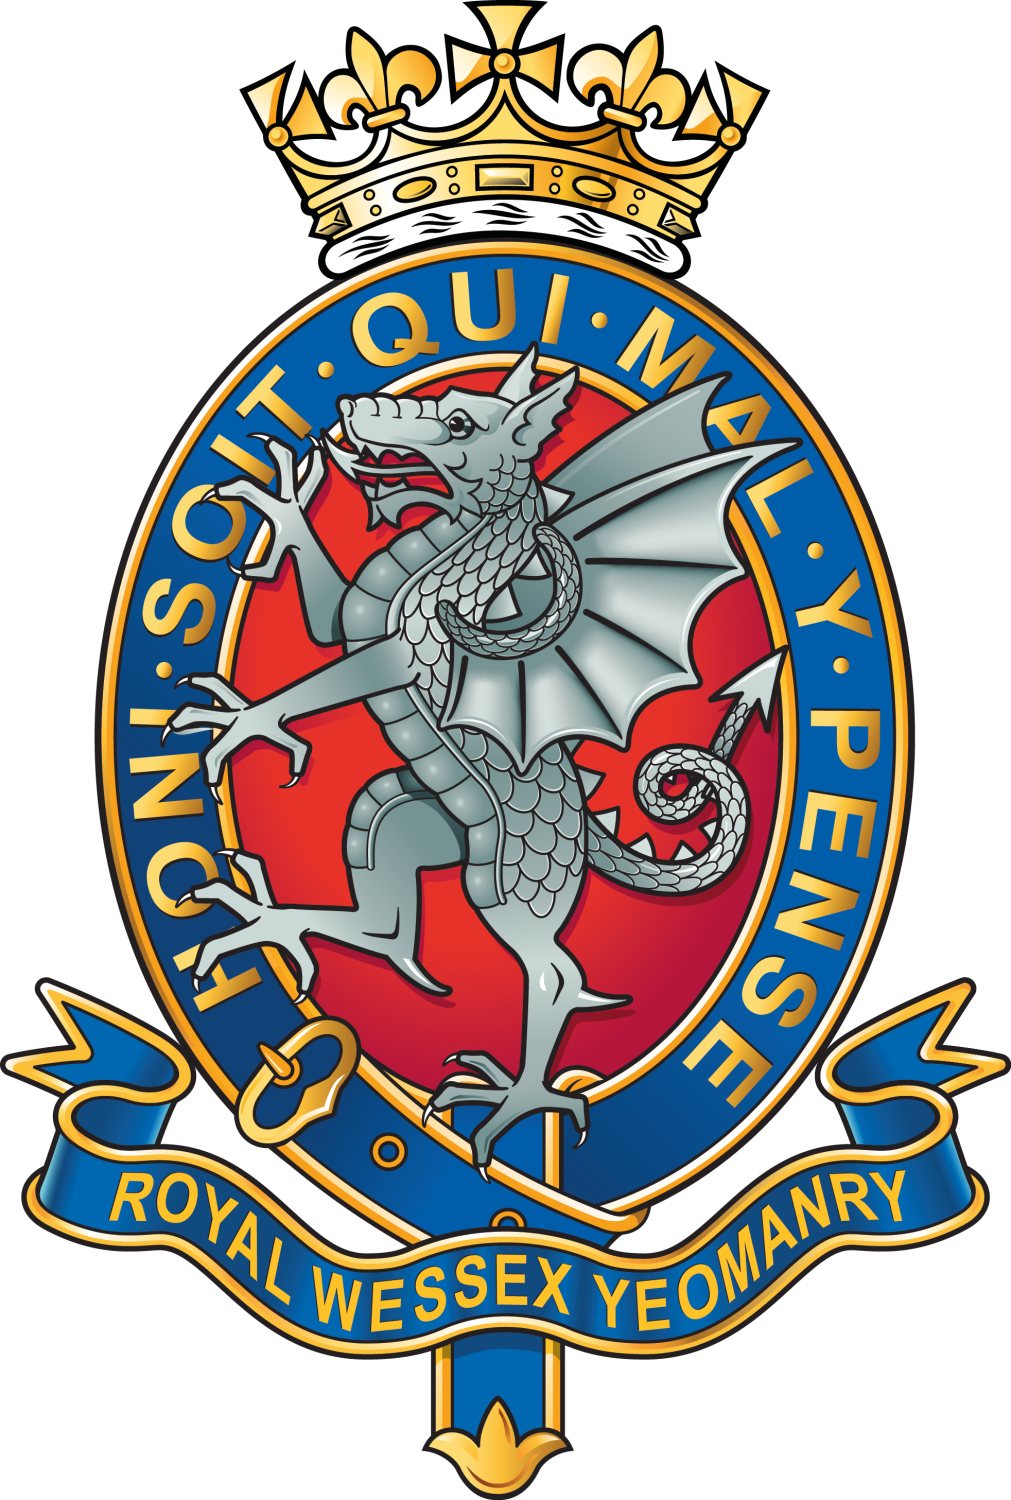 Royal Wessex Yeomanry